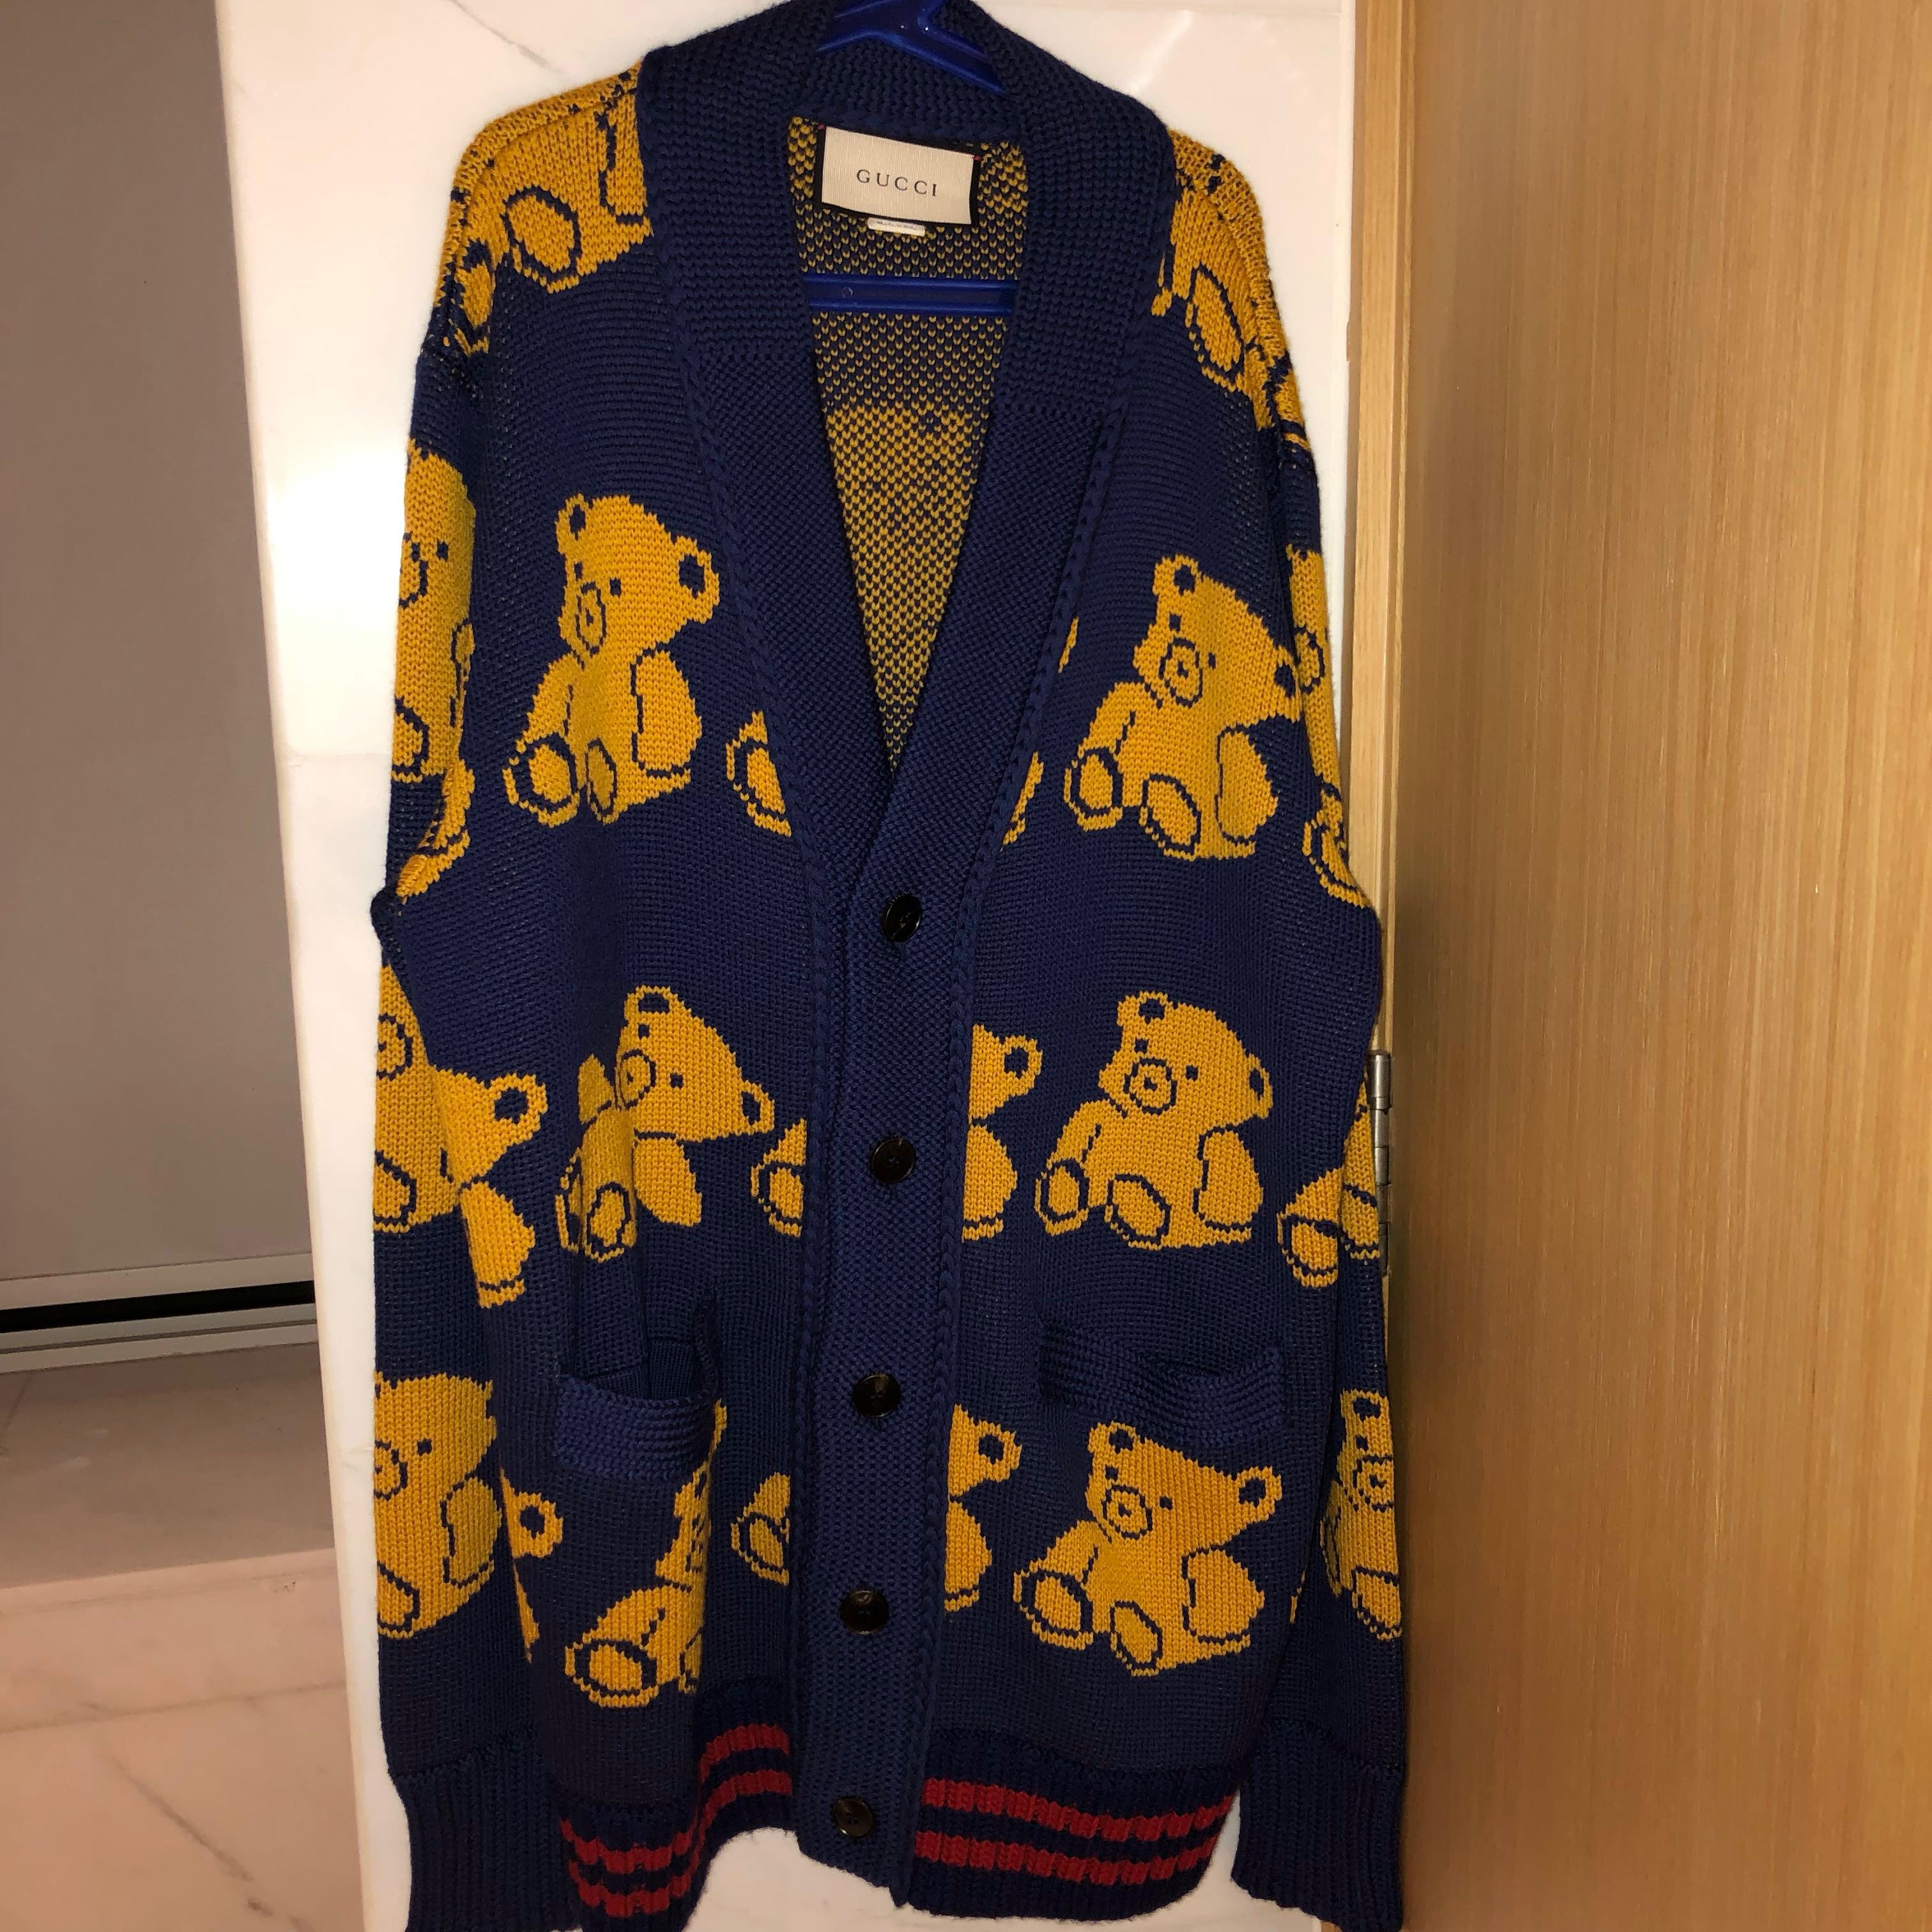 gucci wool sweater with teddy bear